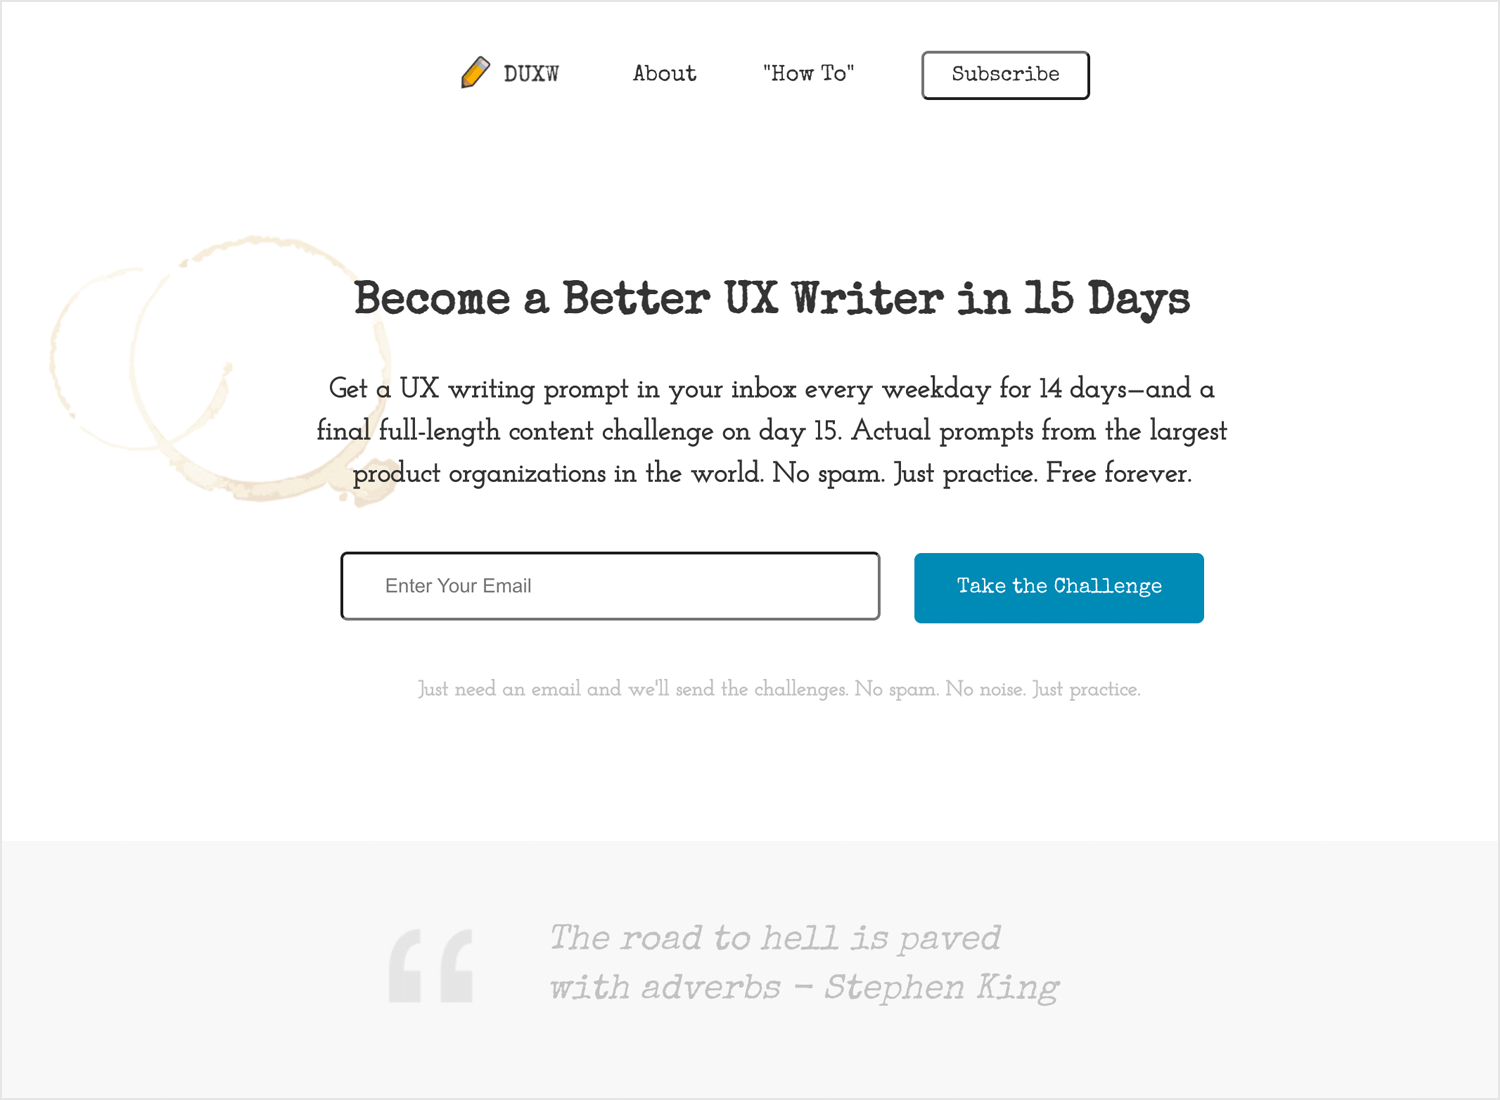 Daily UX Writing course